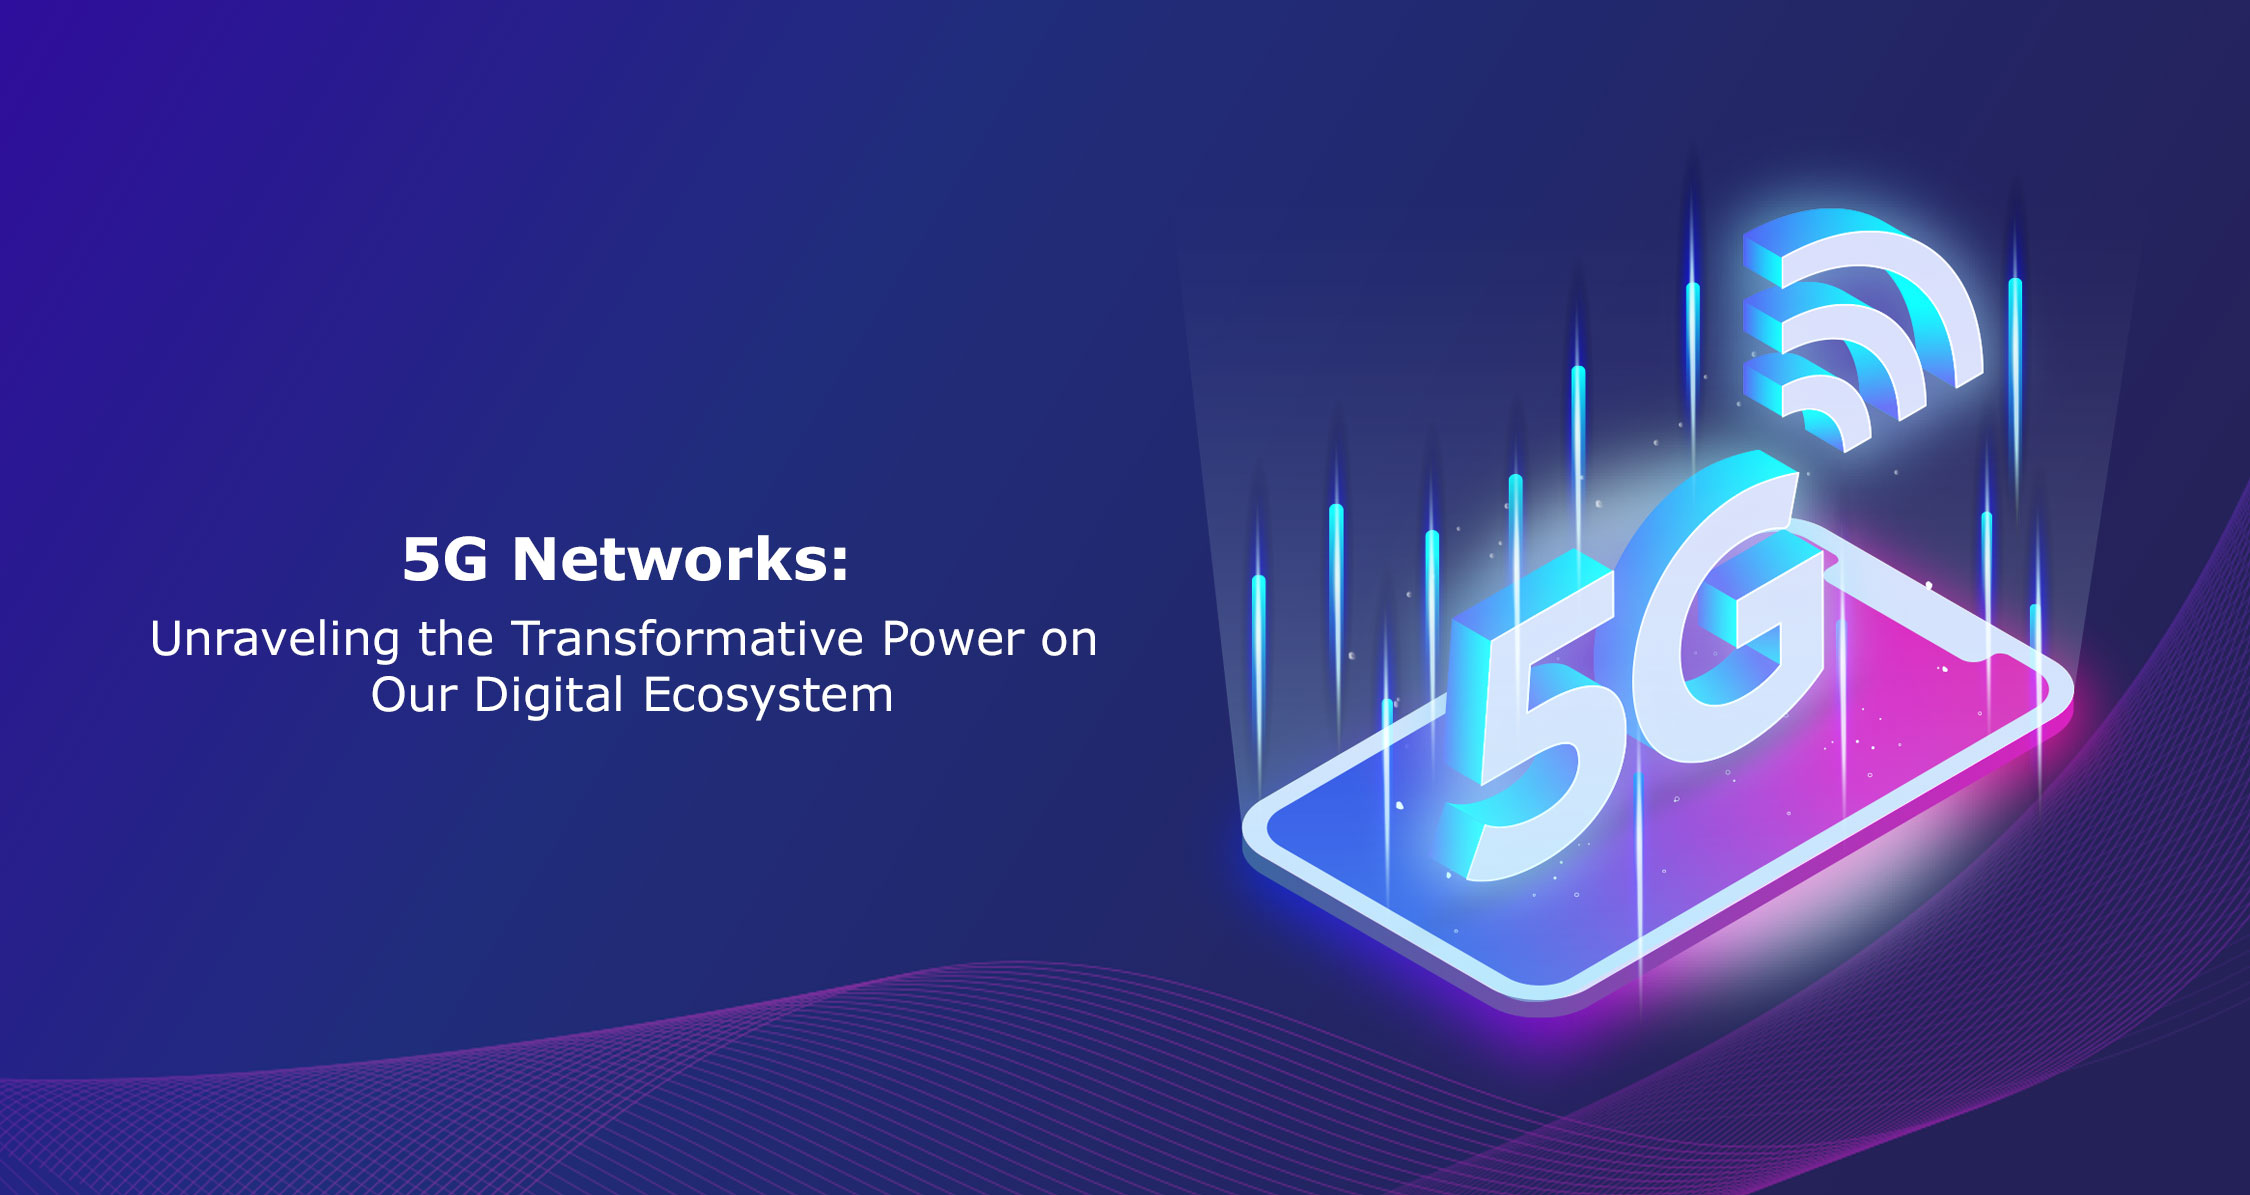 5G-Networks-Unraveling-the-Transformative-Power-on-Our-Digital-Ecosystem